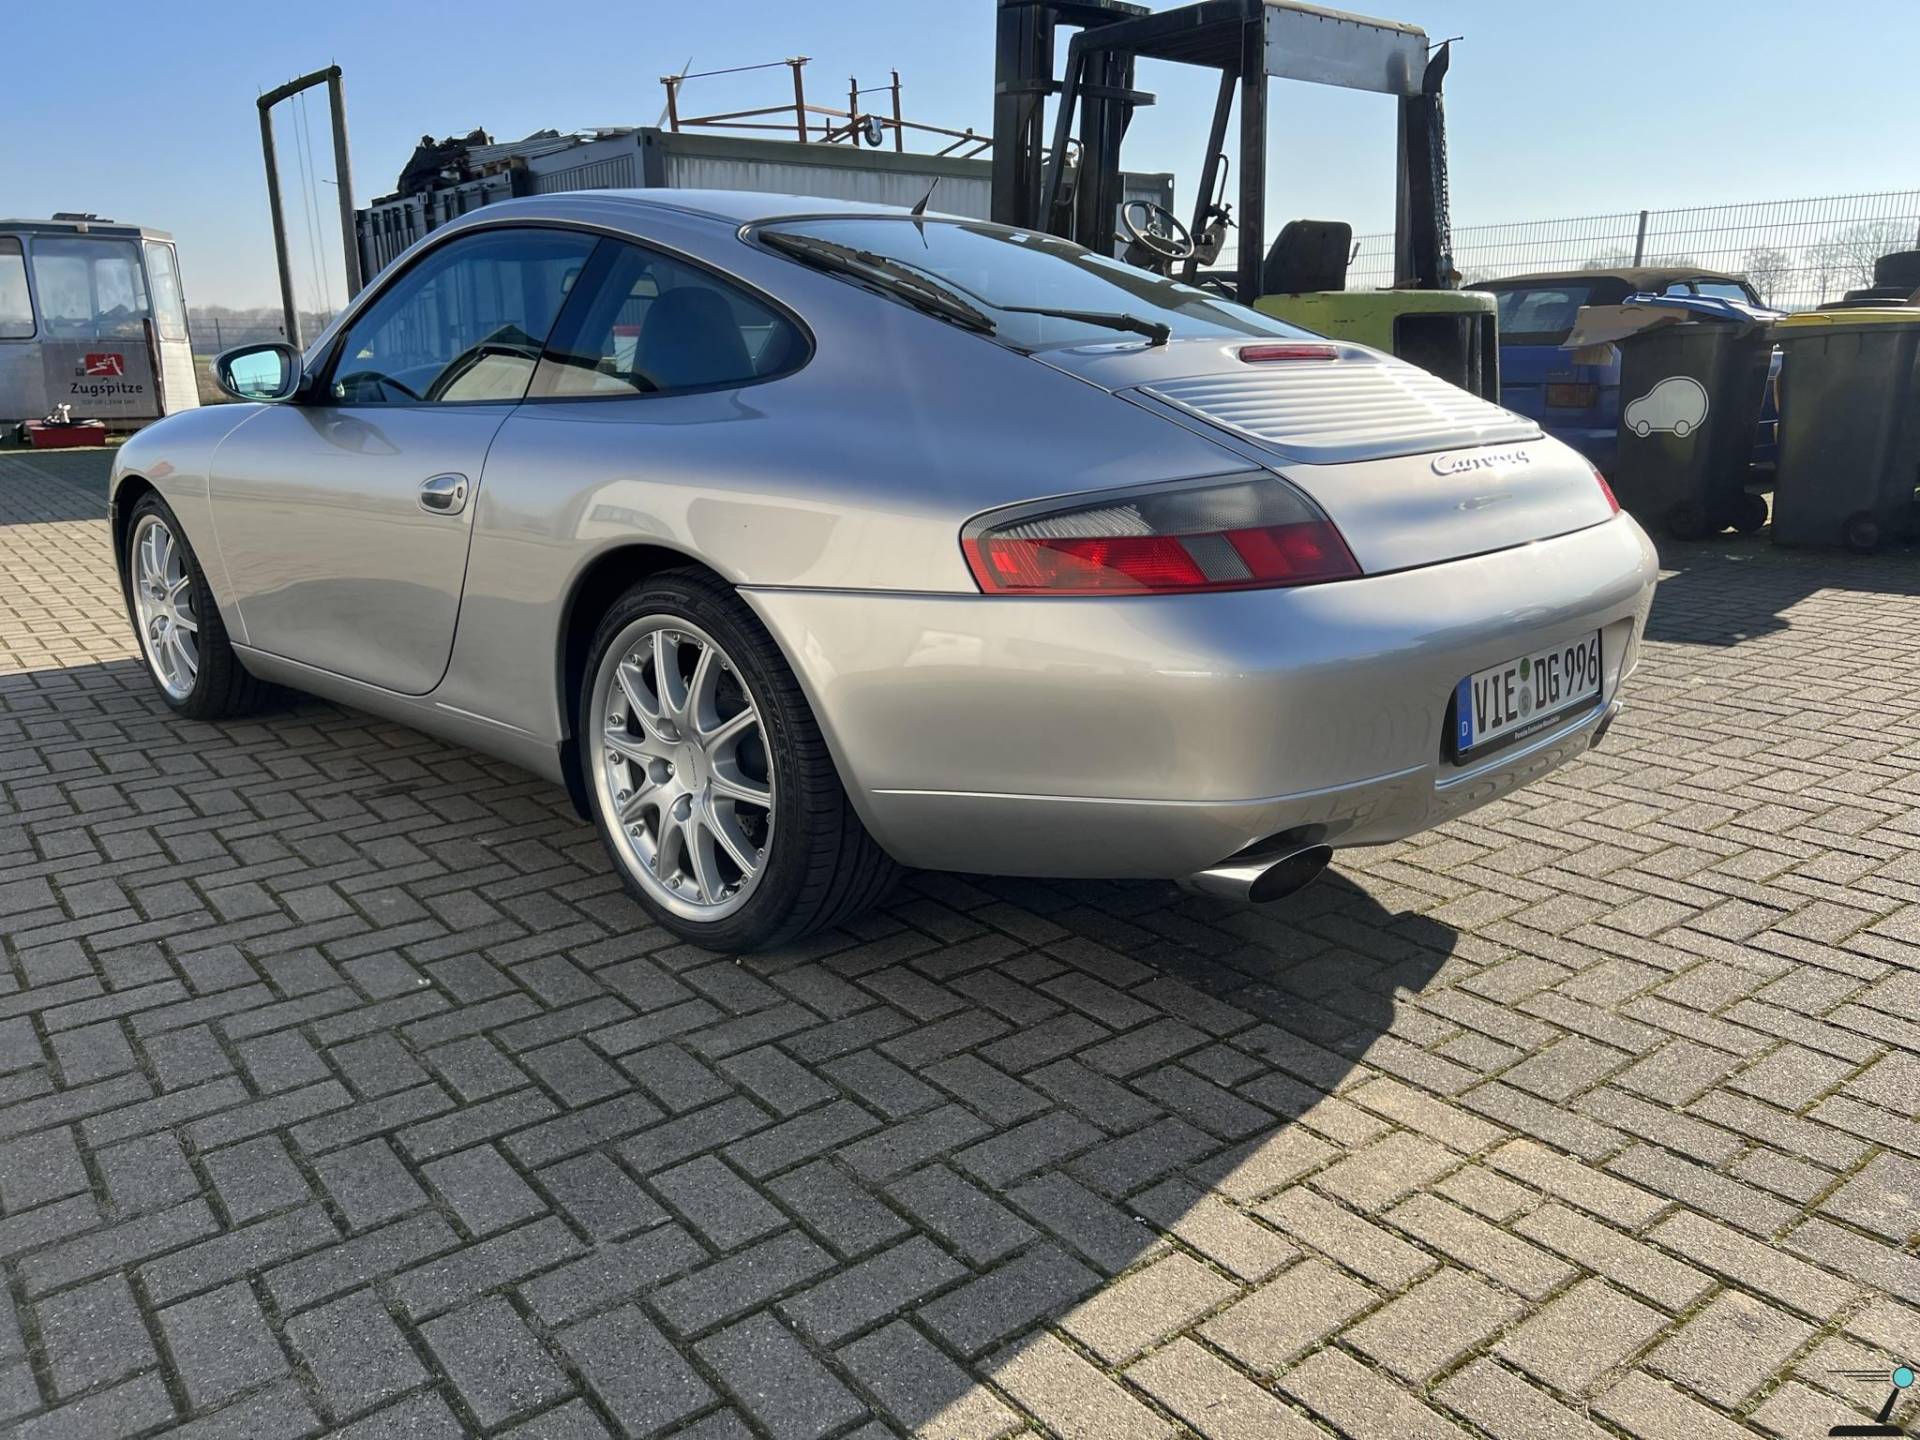 For Sale: Porsche 911 Carrera 4 (1999) offered for $65,085